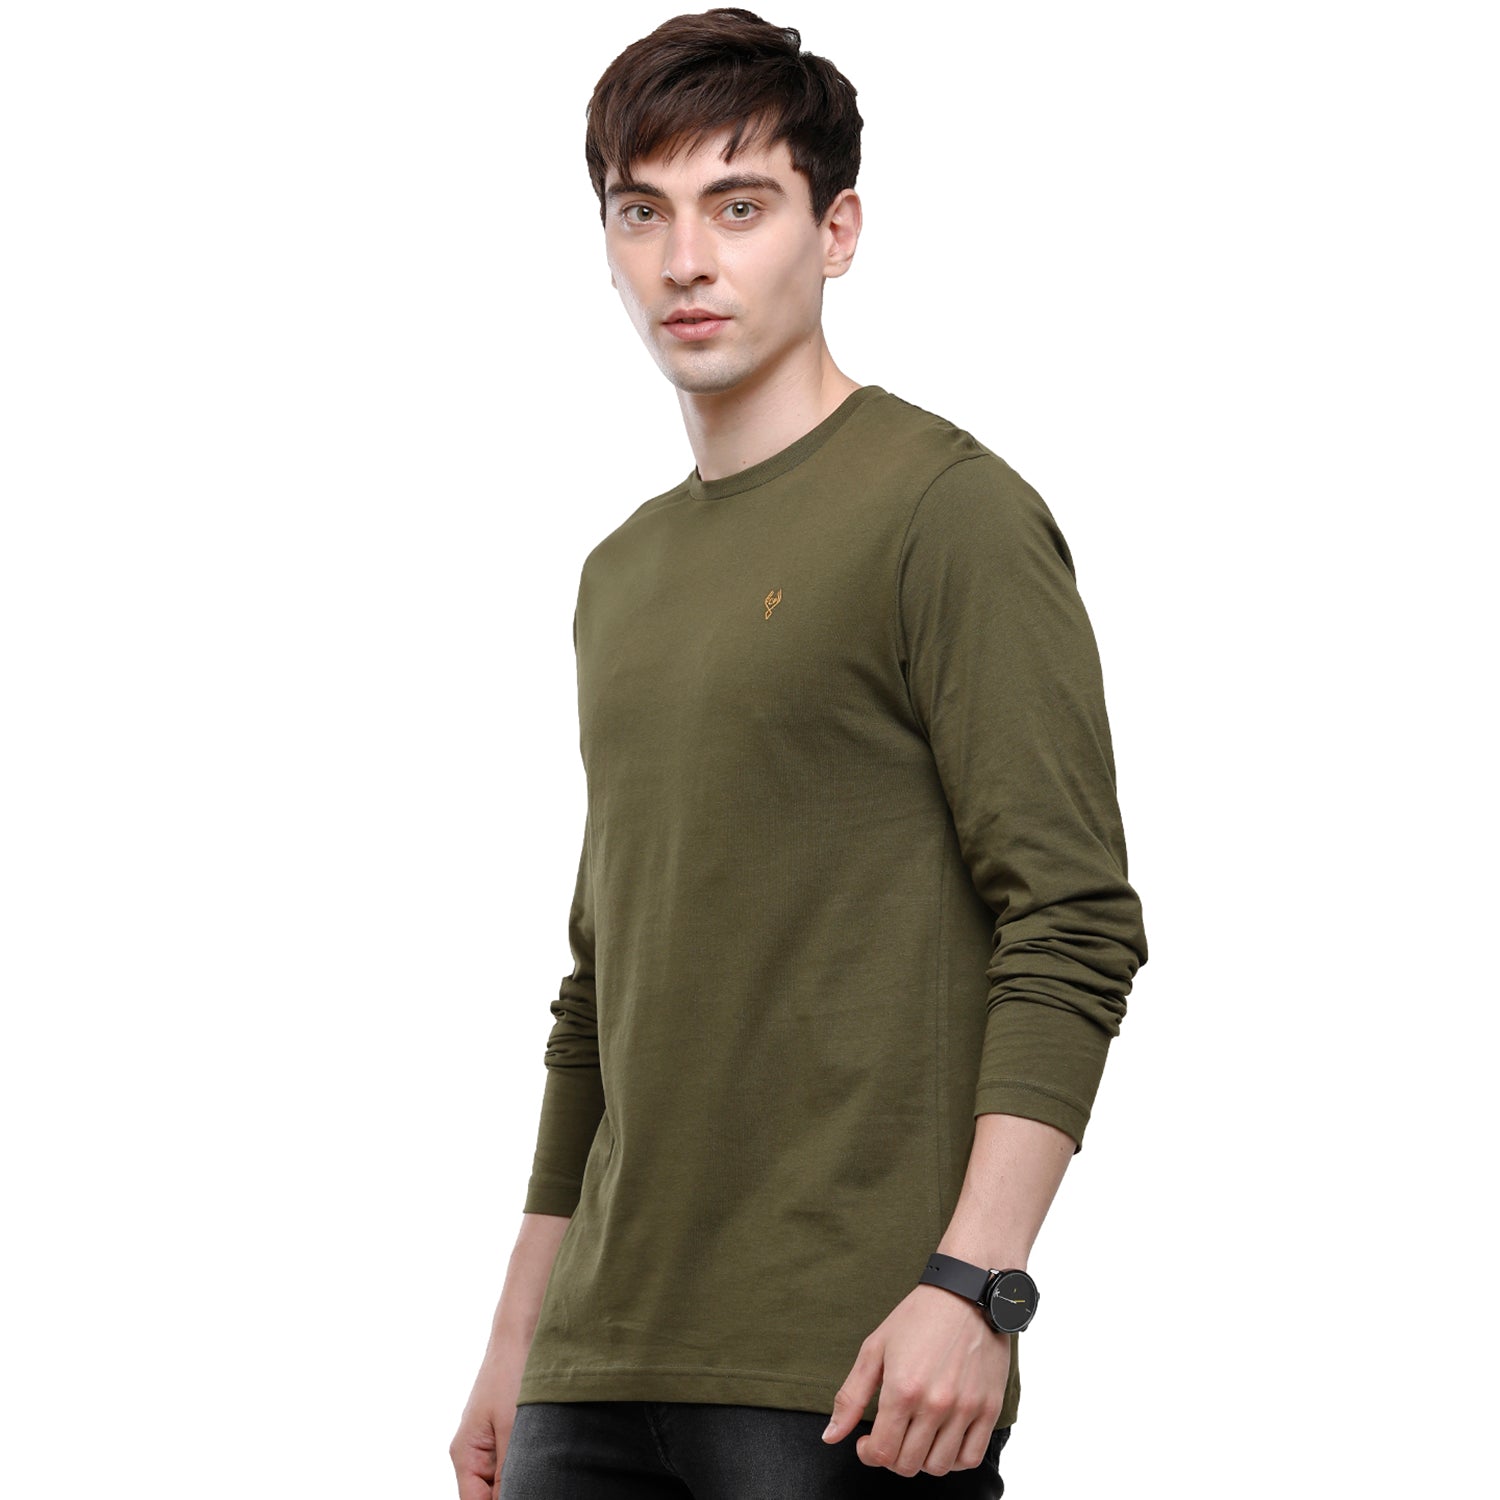 Classic polo Men's Green Single Jersey Crew Neck Full Sleeve Slim Fit T-Shirt - Comet 05 T-shirt Classic Polo 